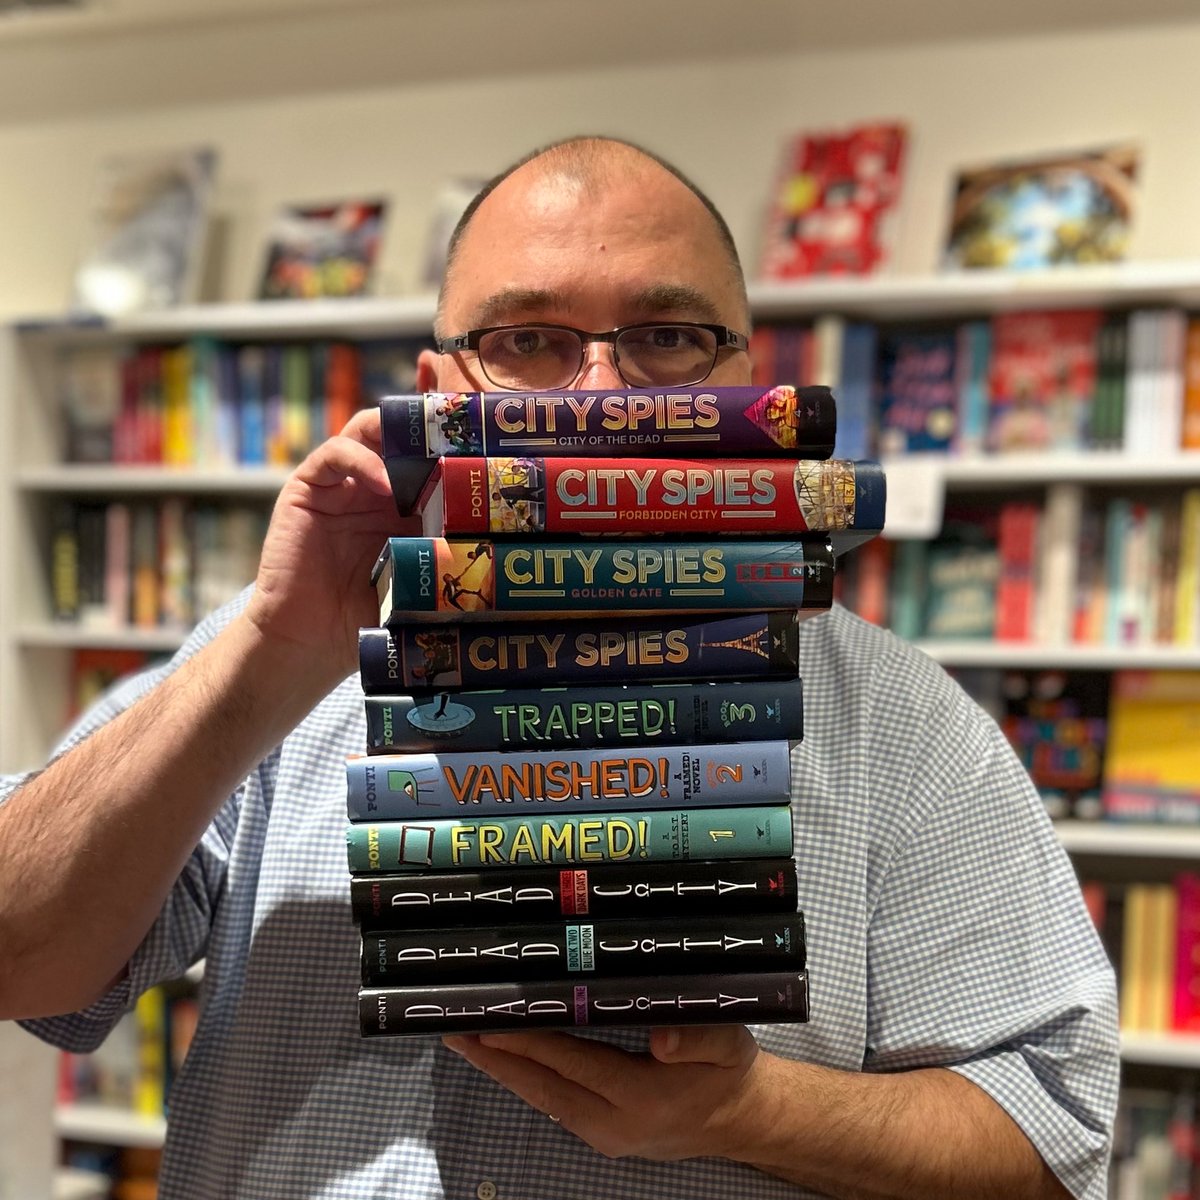 Today is the book birthday for City Spies City of the Dead. Normally, I make a mock birth announcement, but since this is book number 10, I thought I'd show the whole family together. (If you enjoy stats, they add up to 3,529 pages and 561,519 words.) Happy Reading! @simonkids